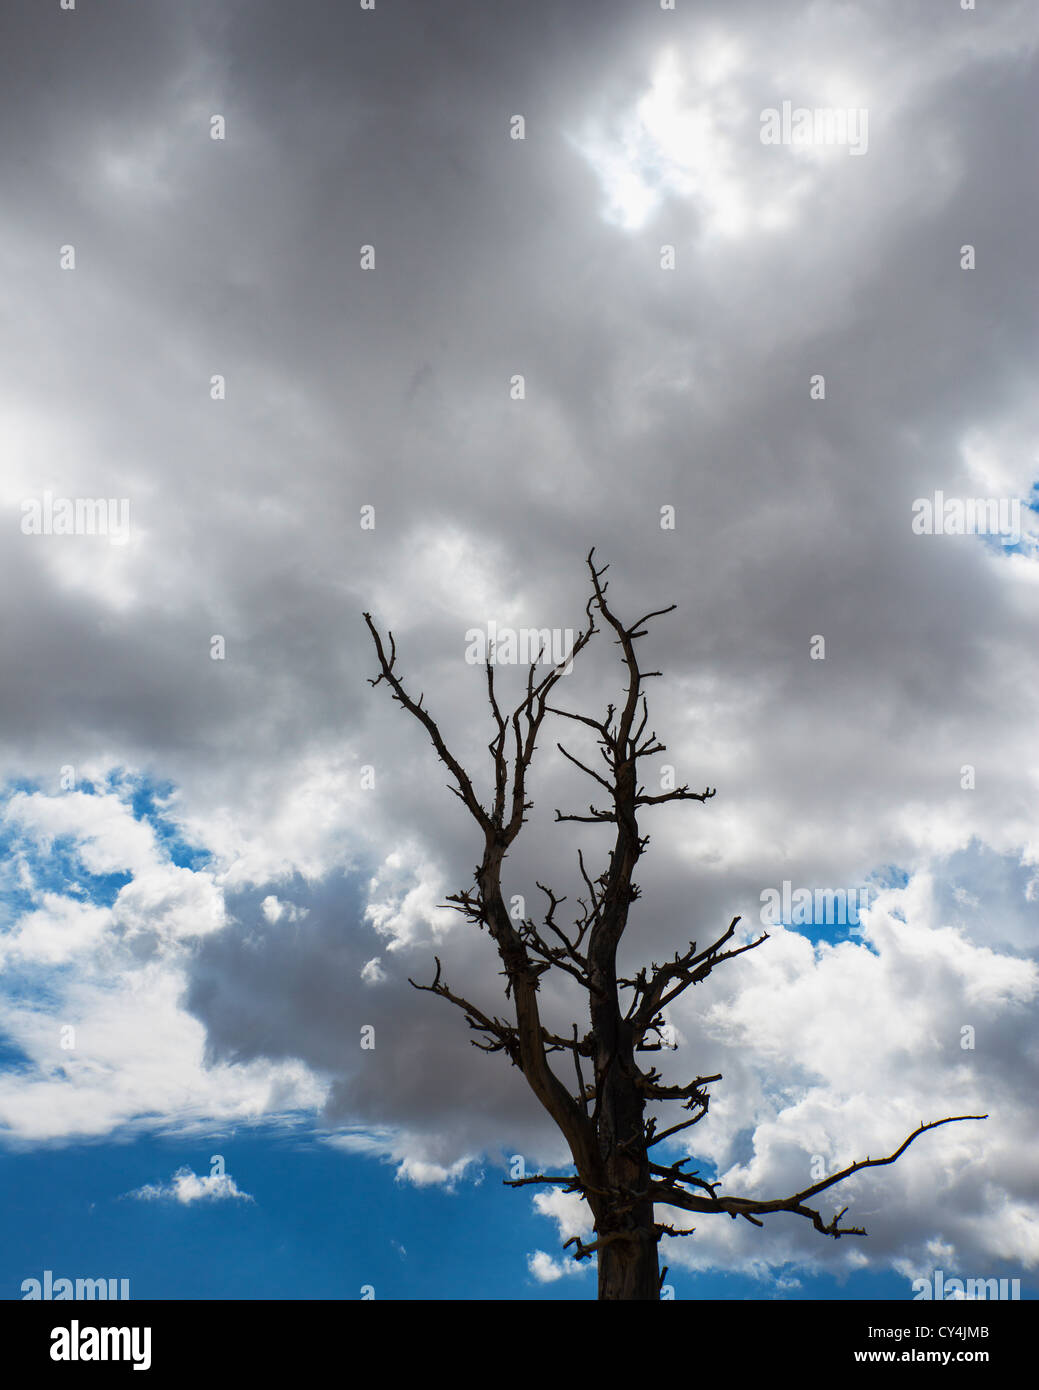 USA, Utah, Bryce Canyon, Dead tree against clouds Stock Photo